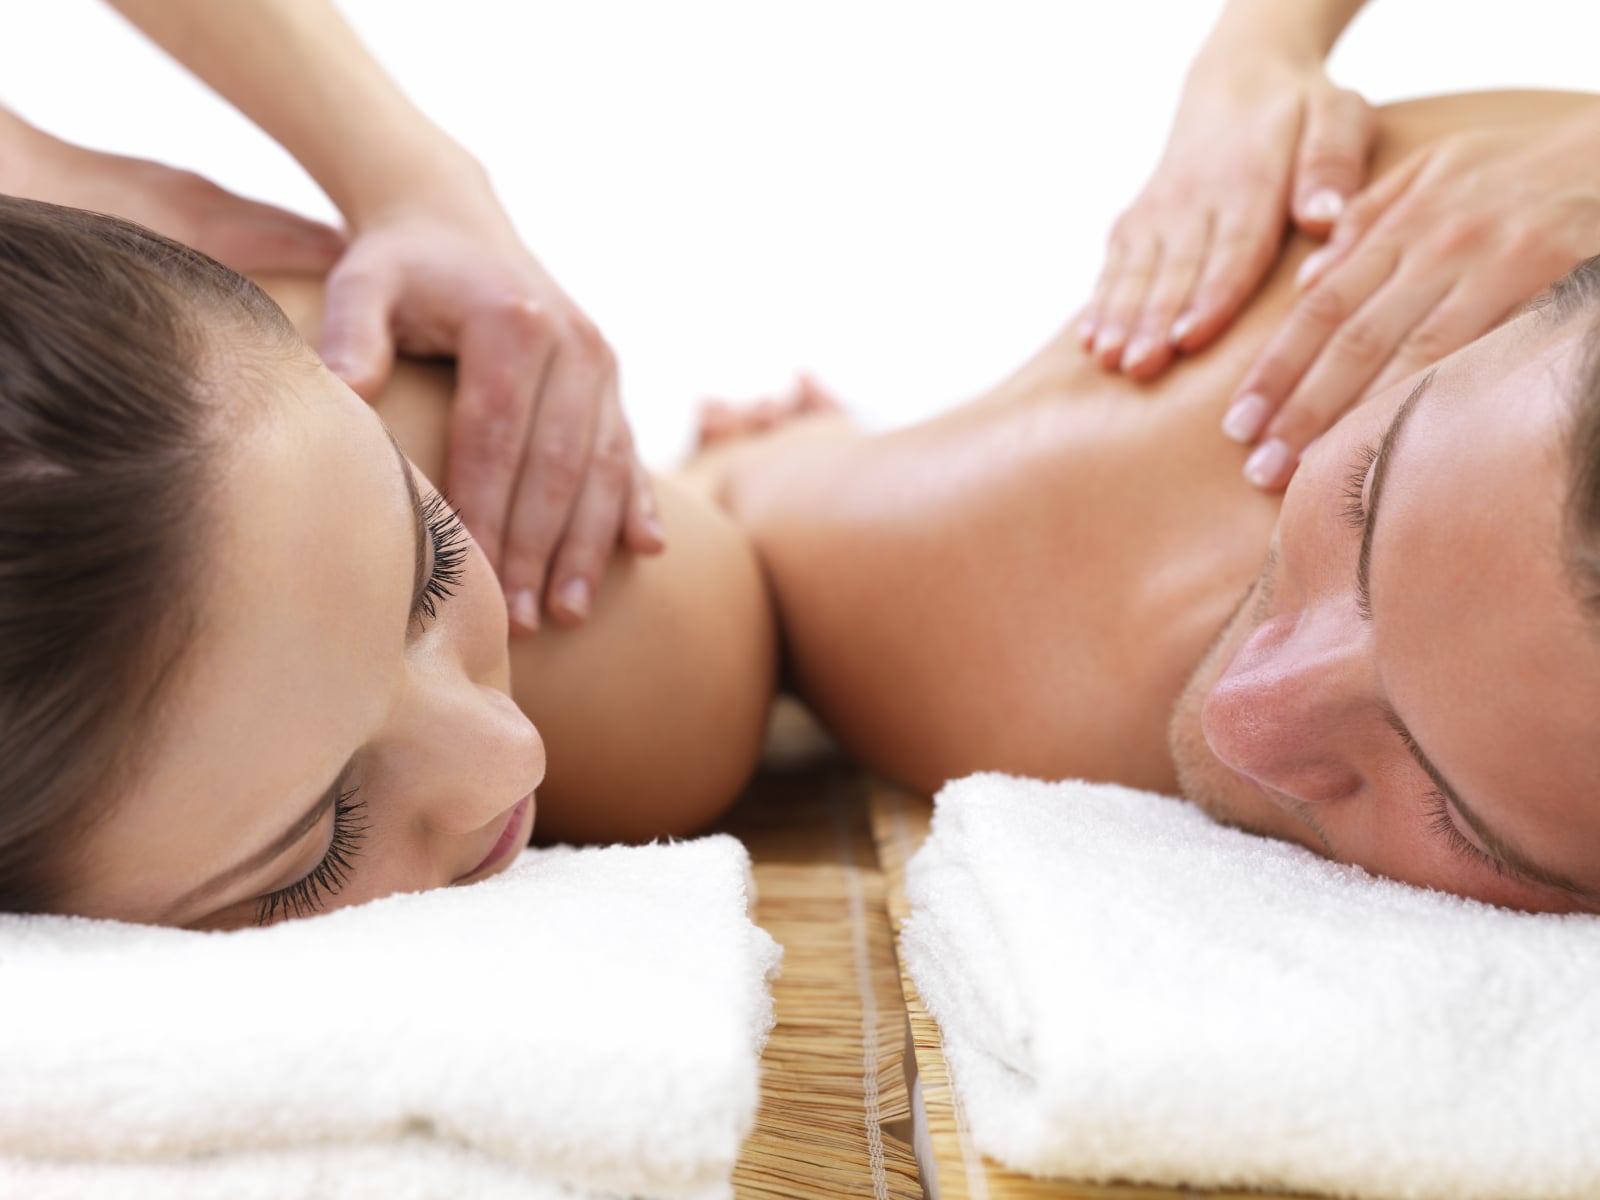 What Are The Benefits Of A Couple’s Massage?